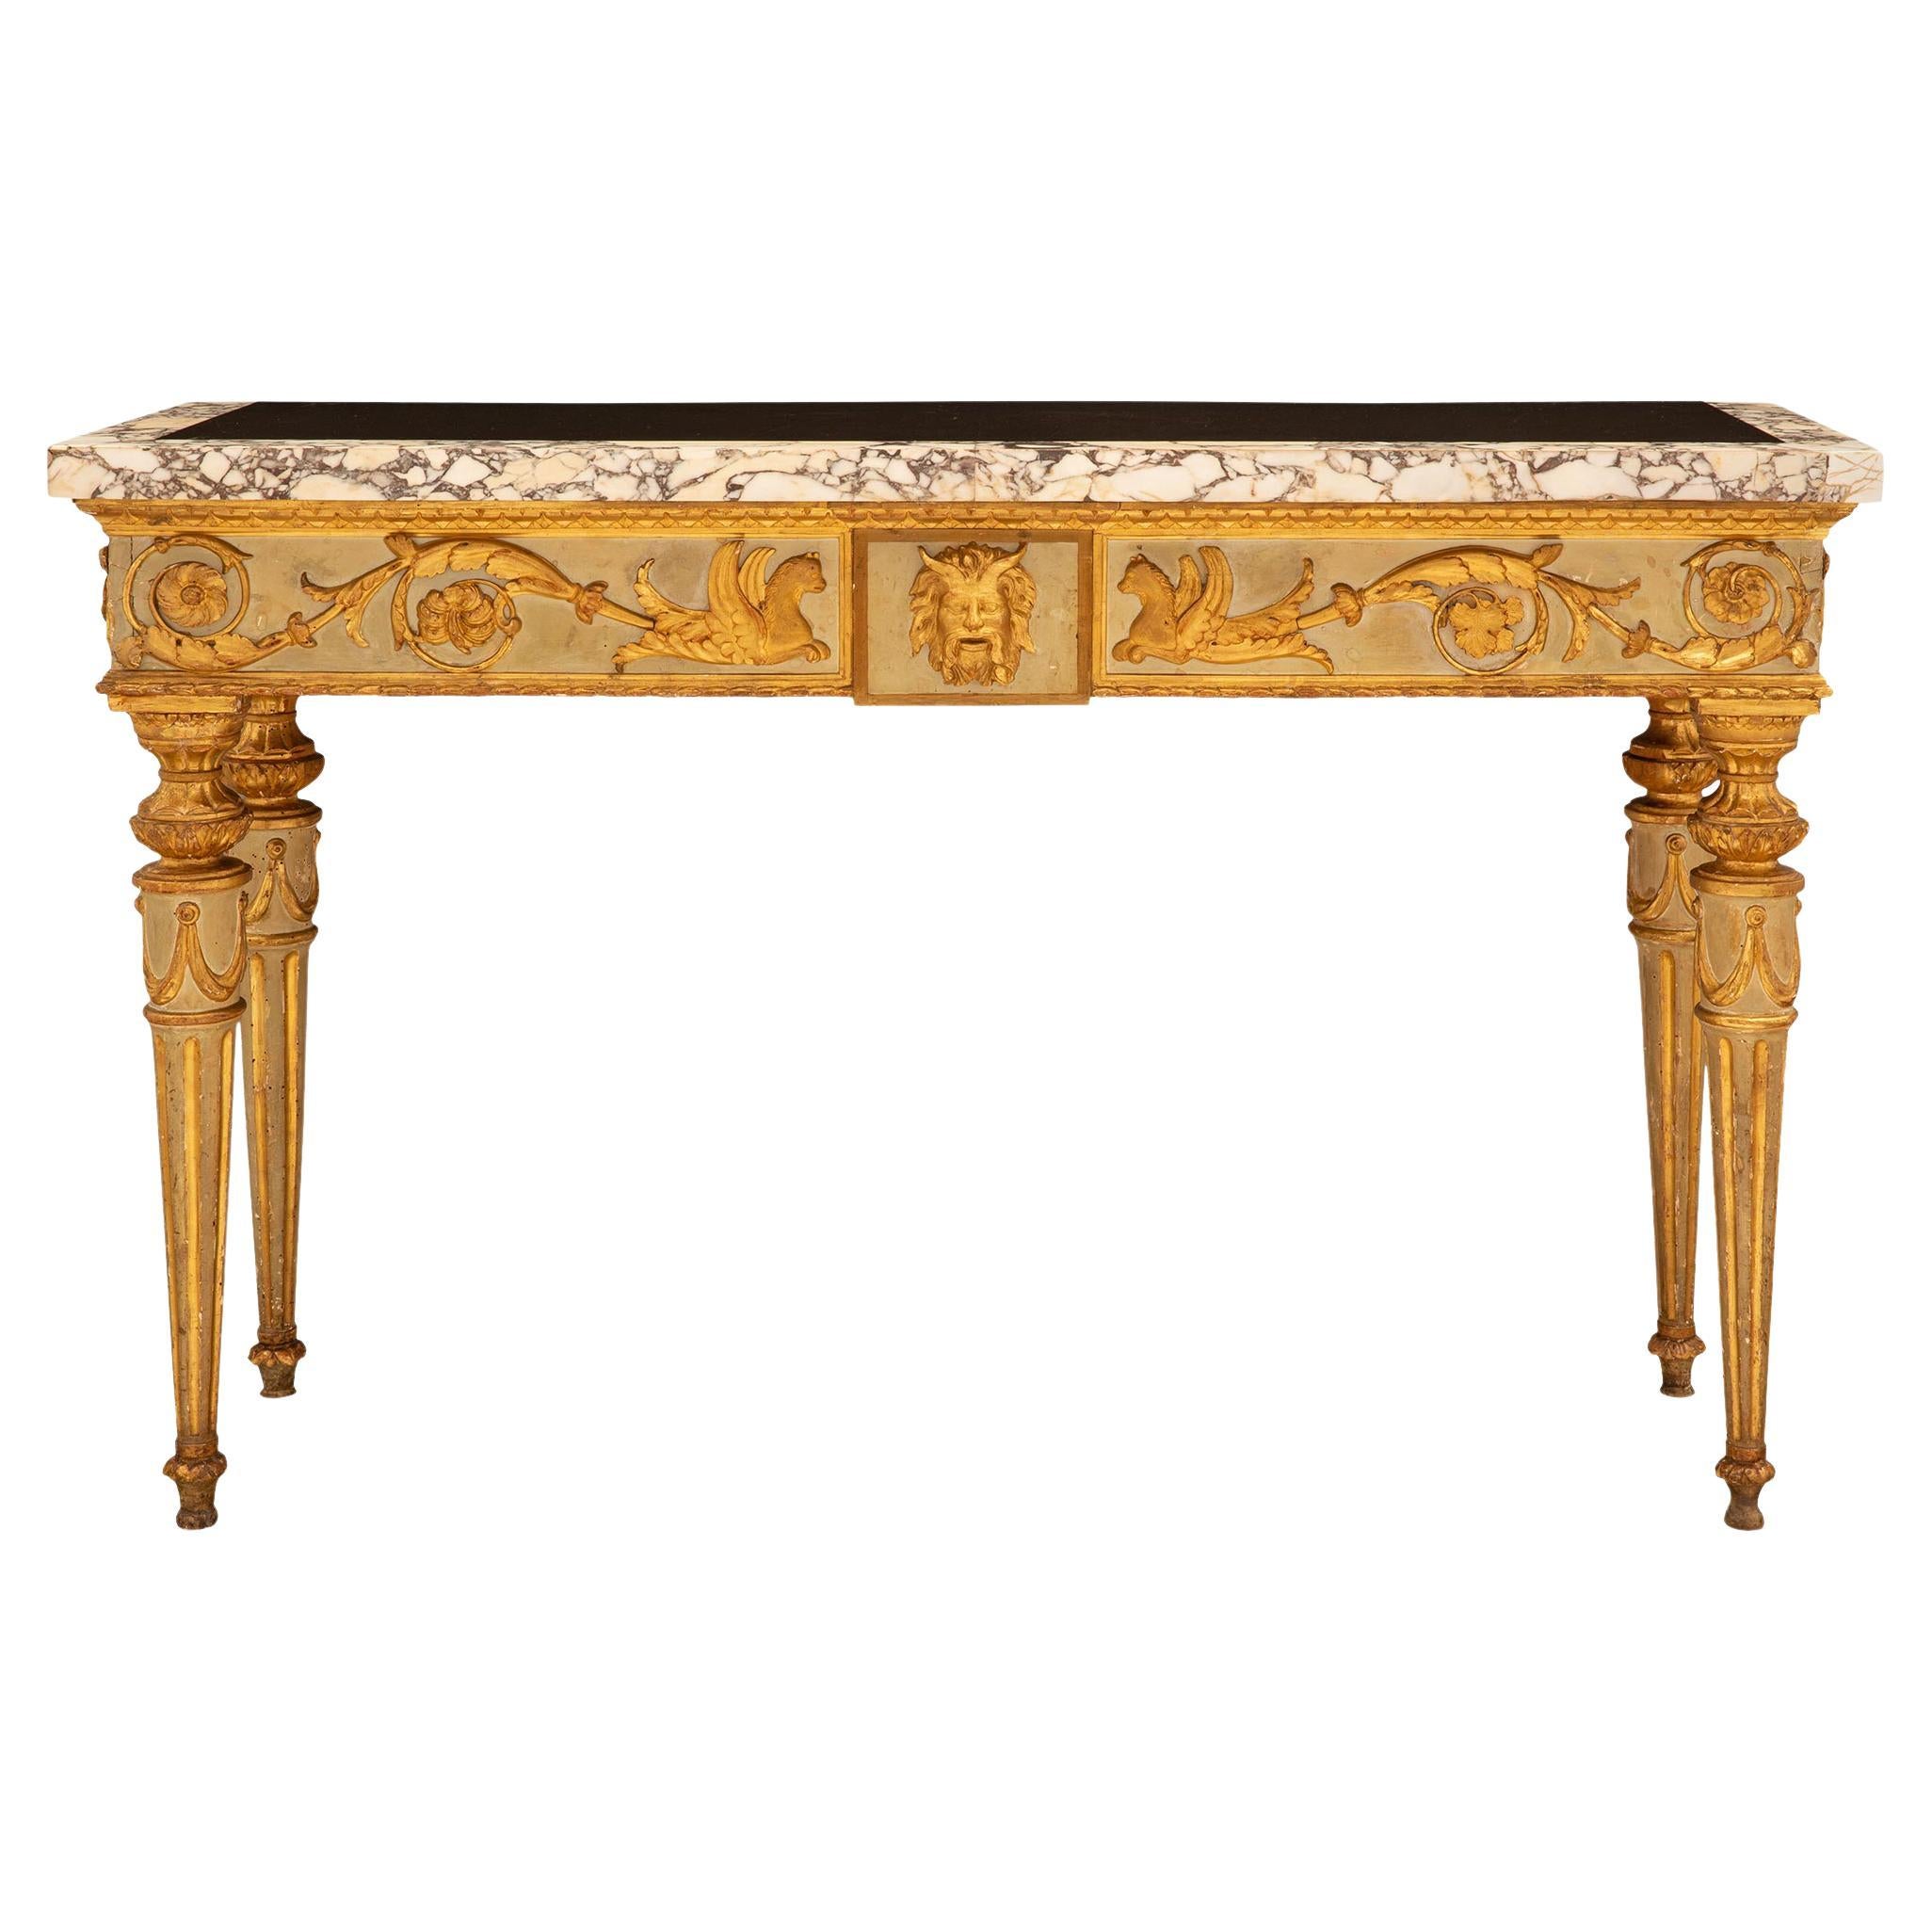 Italian 18th Century Louis XVI Period Patinated and Giltwood Console